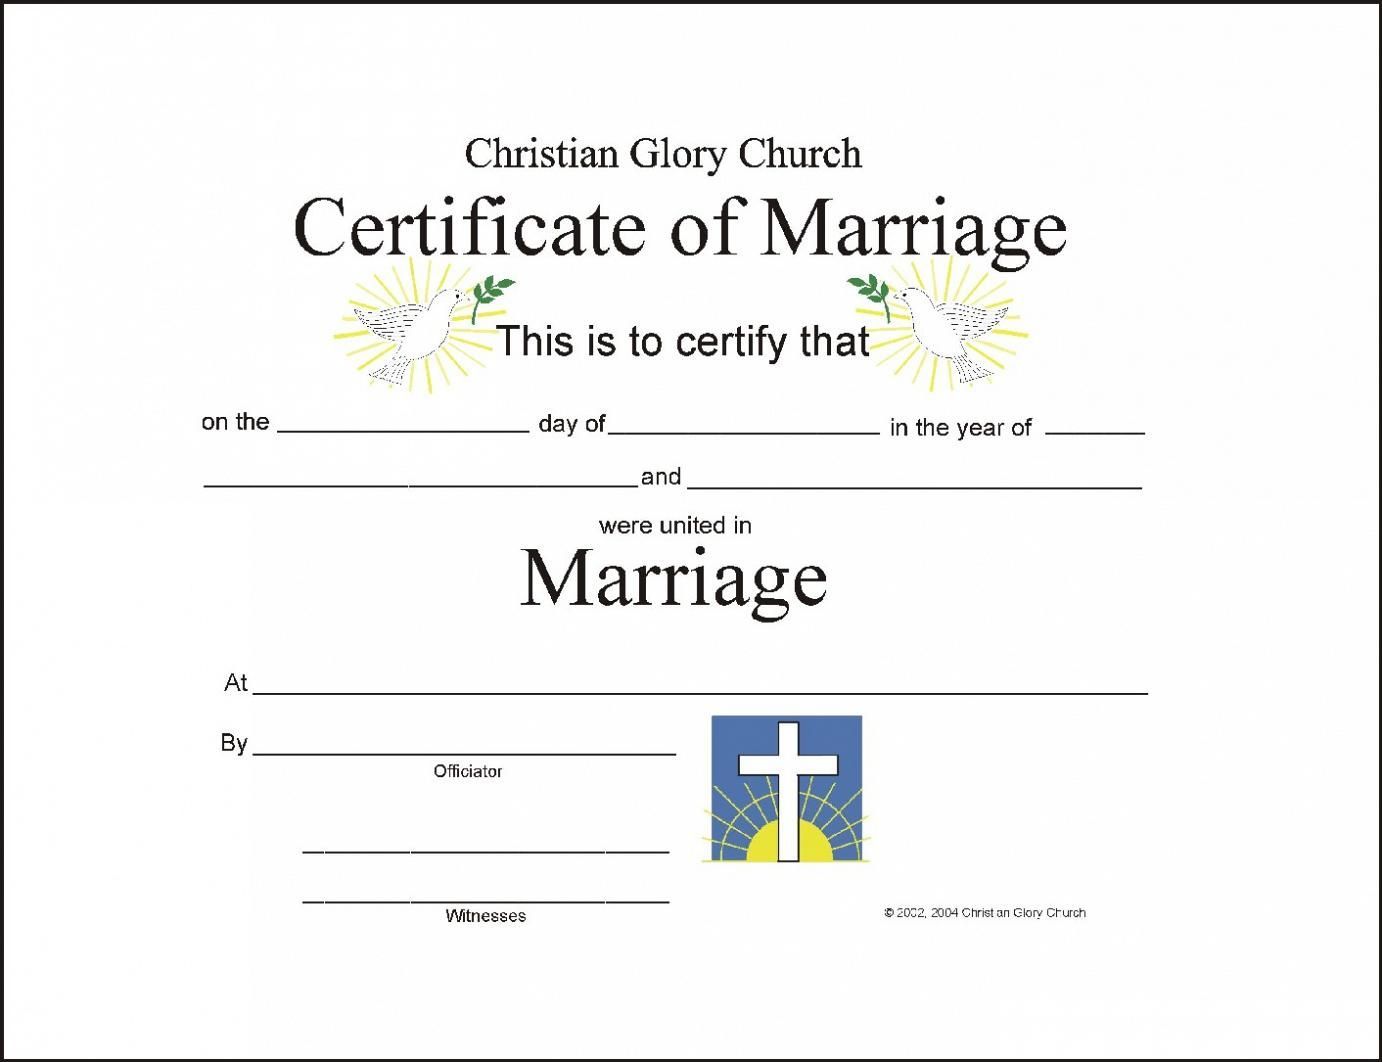 catholic certificate of marriage template, marriage certificate of catholic church, catholic marriage certificate template, catholic church marriage certificate template, roman catholic marriage certificate, church marriage certificate template, religious marriage certificate template